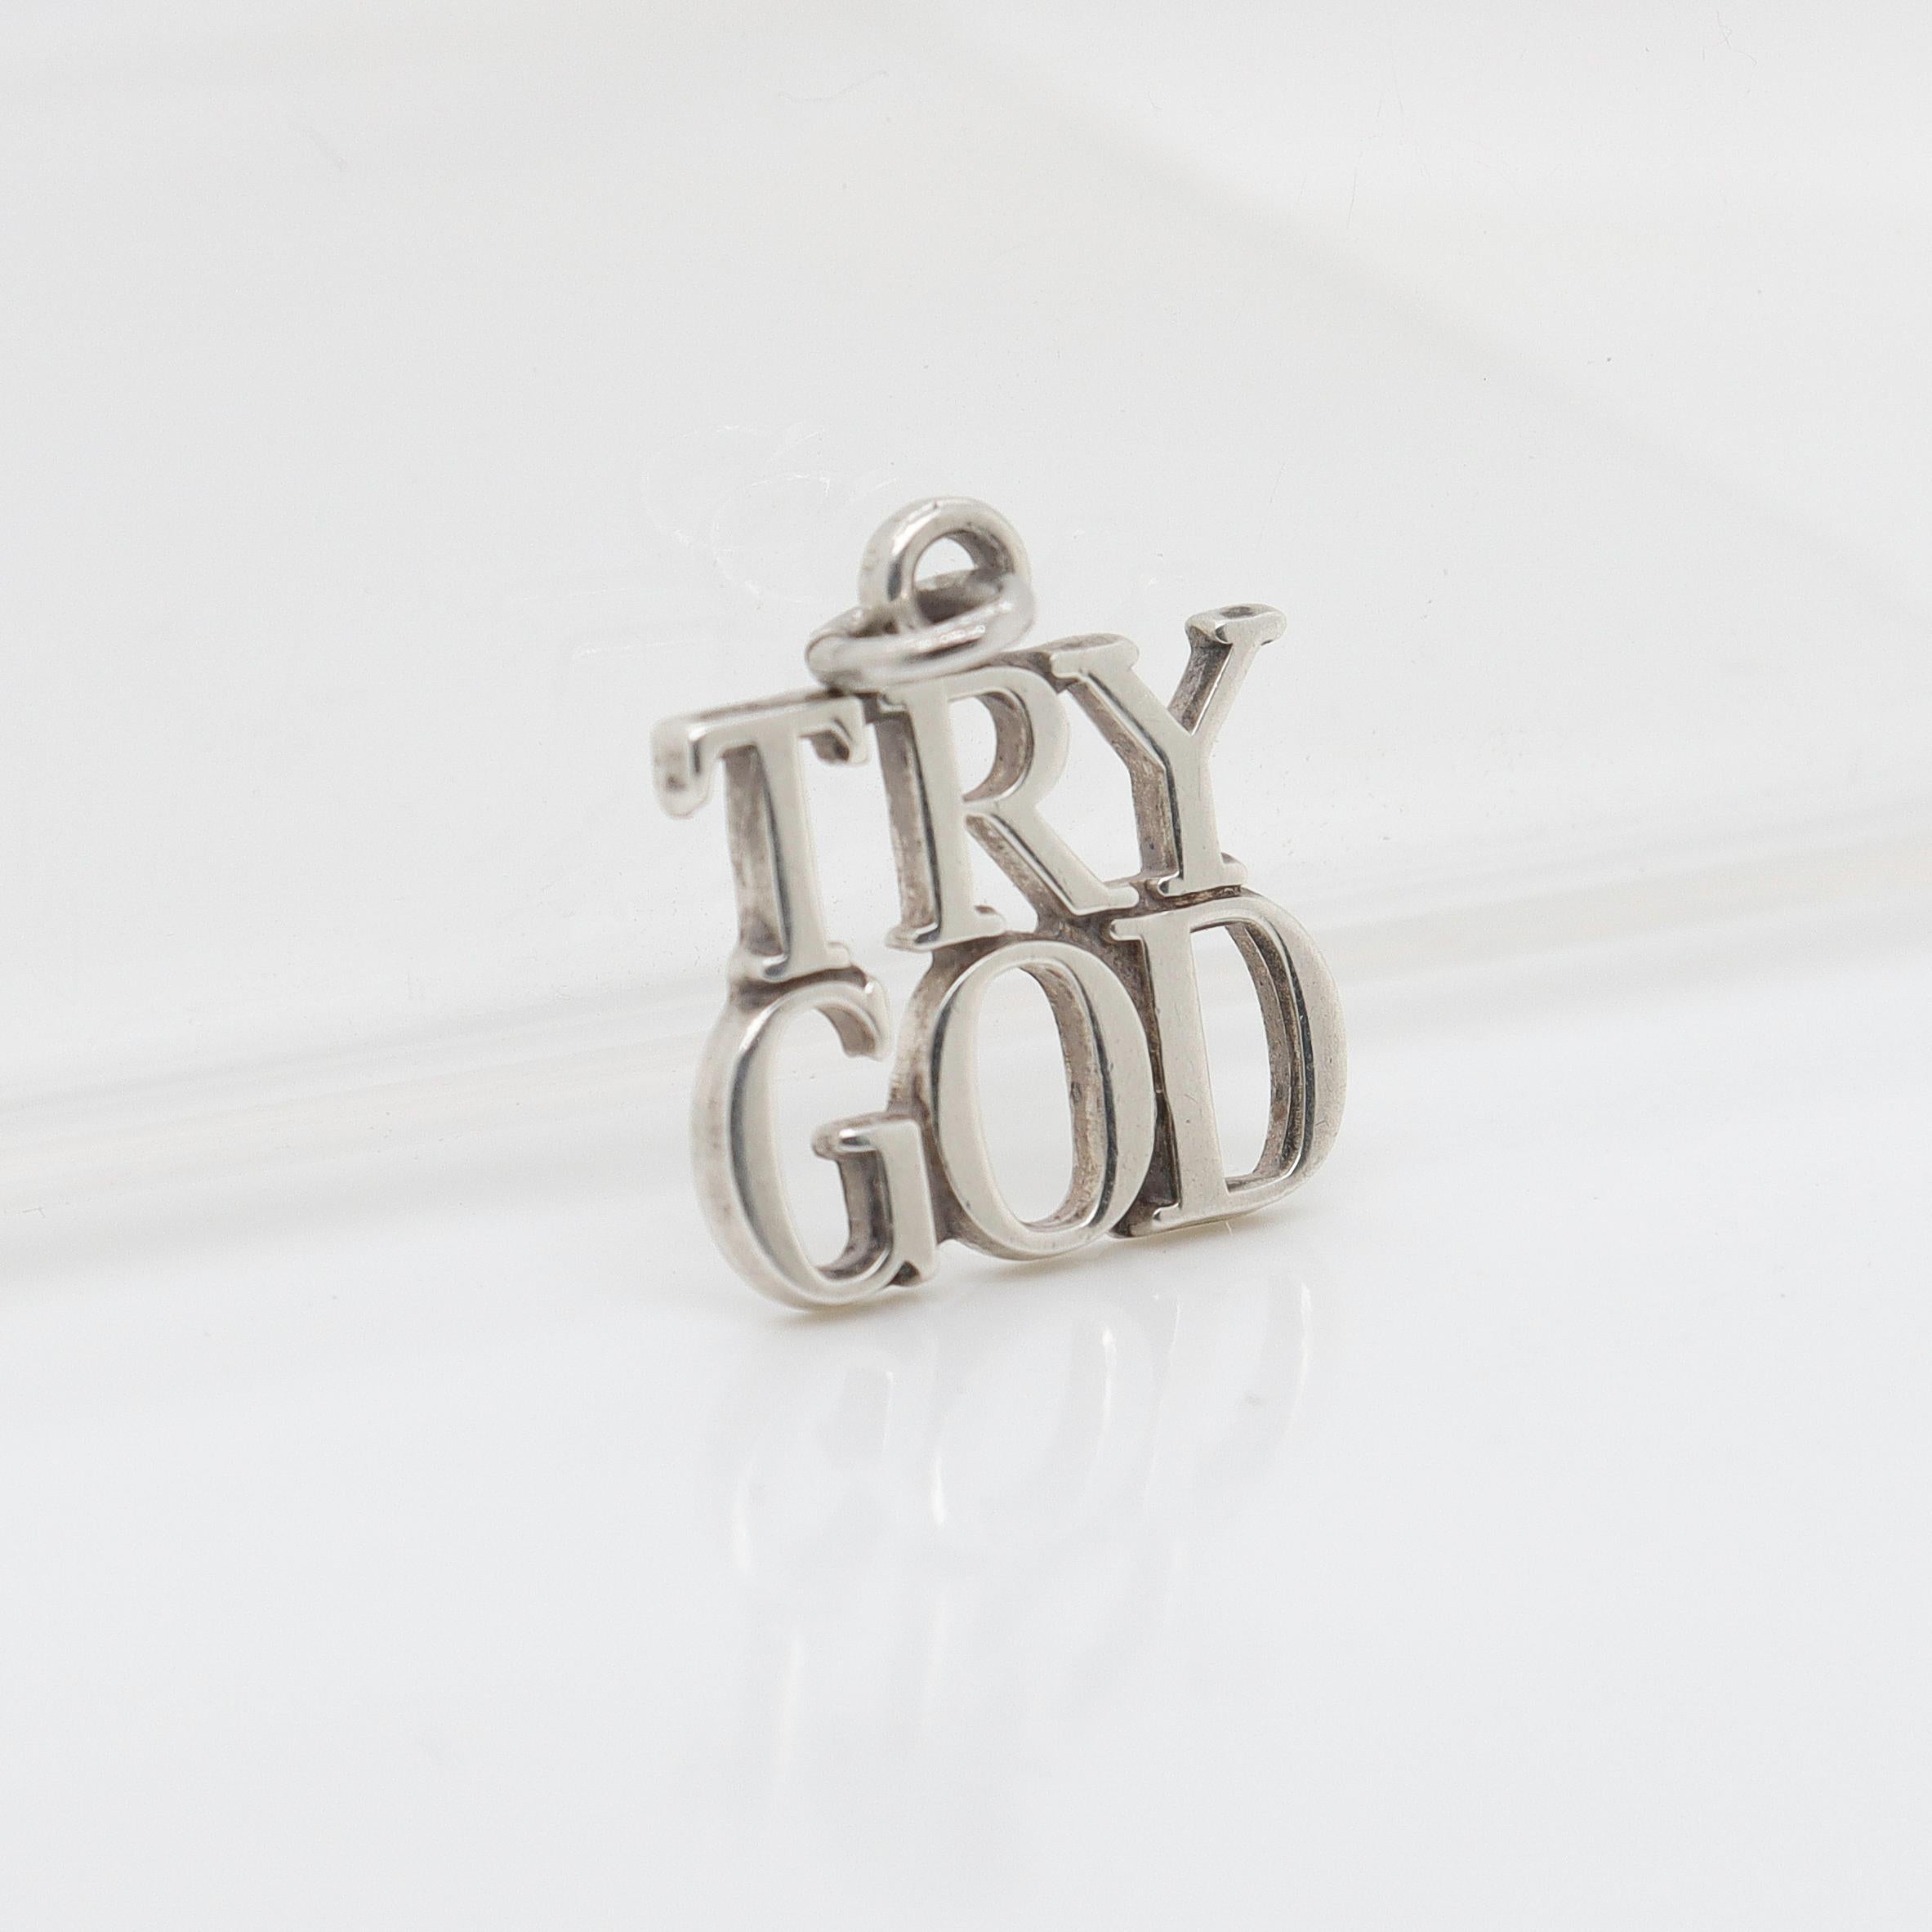 A fine silver pendant or charm.

By Tiffany & Co.

In sterling silver.

In the form of the words 